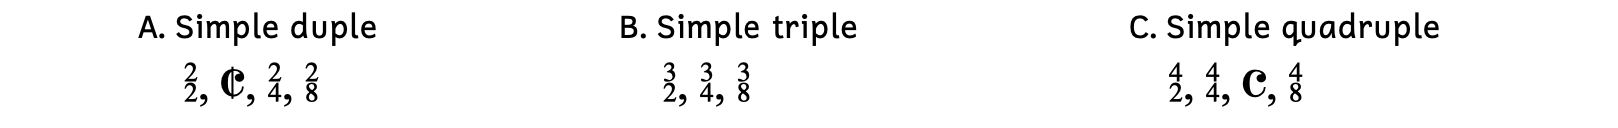 Example A shows simple duple meters including 2-2, cut time, 2-4, and 2-8. Example B shows simple triple meters including 3-2, 3-4, and 3-8. Example C shows simple quadruple meters including 4-2, 4-4, common time, and 4-8.